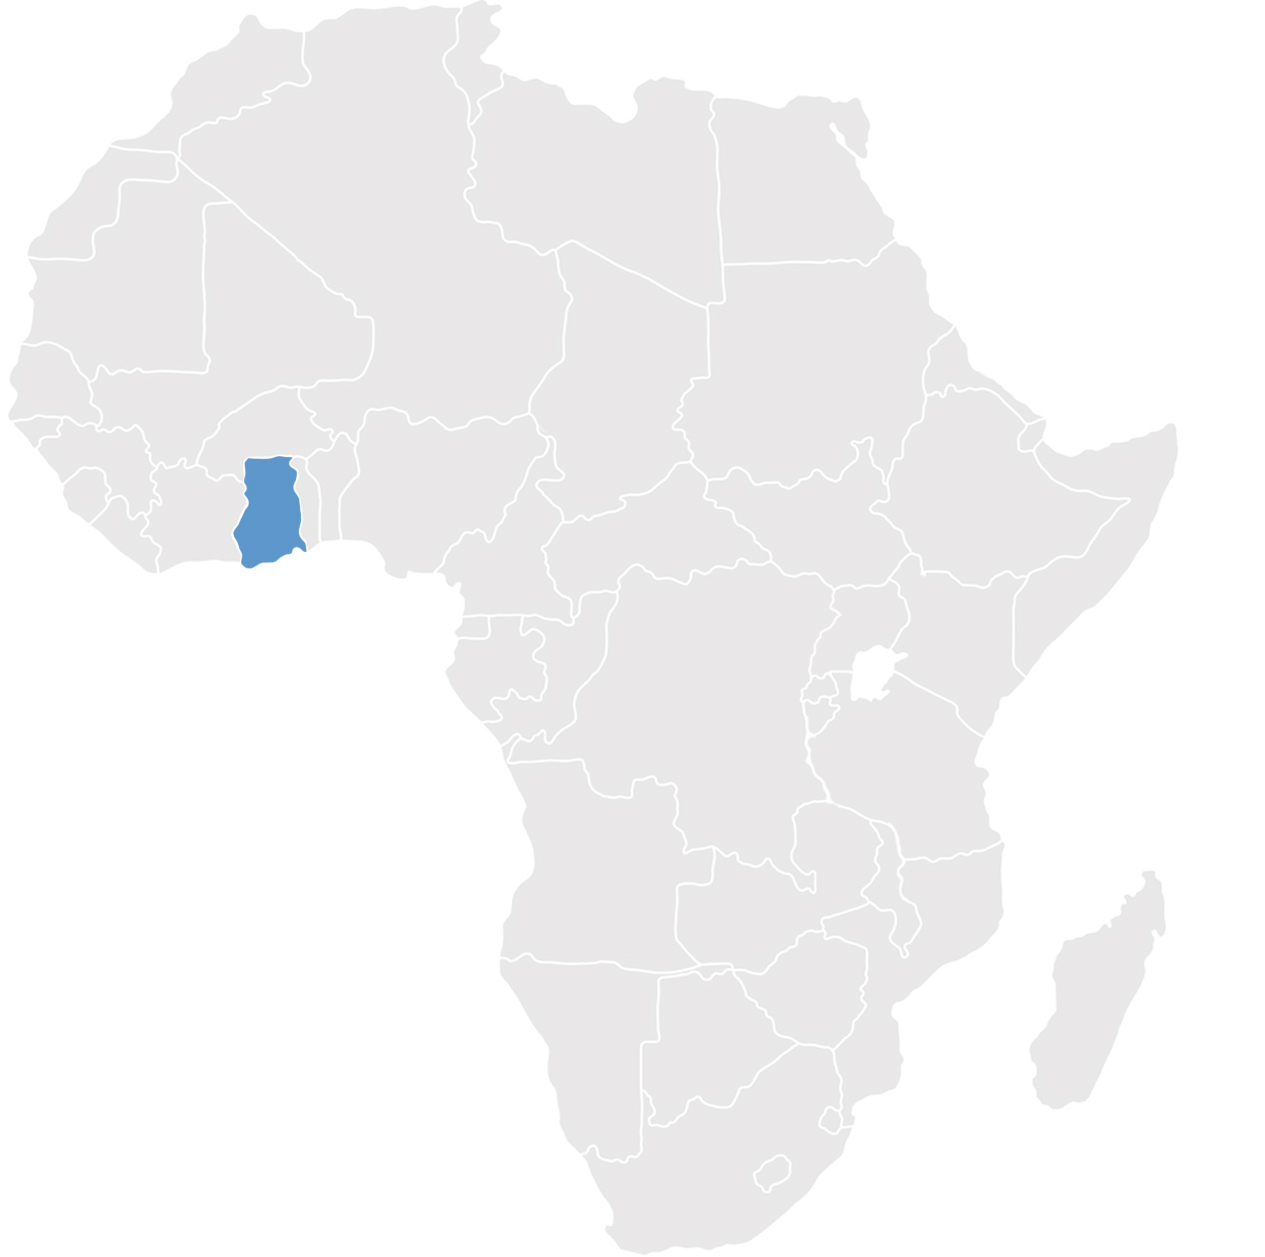 Gray map of Africa with Ghana in blue